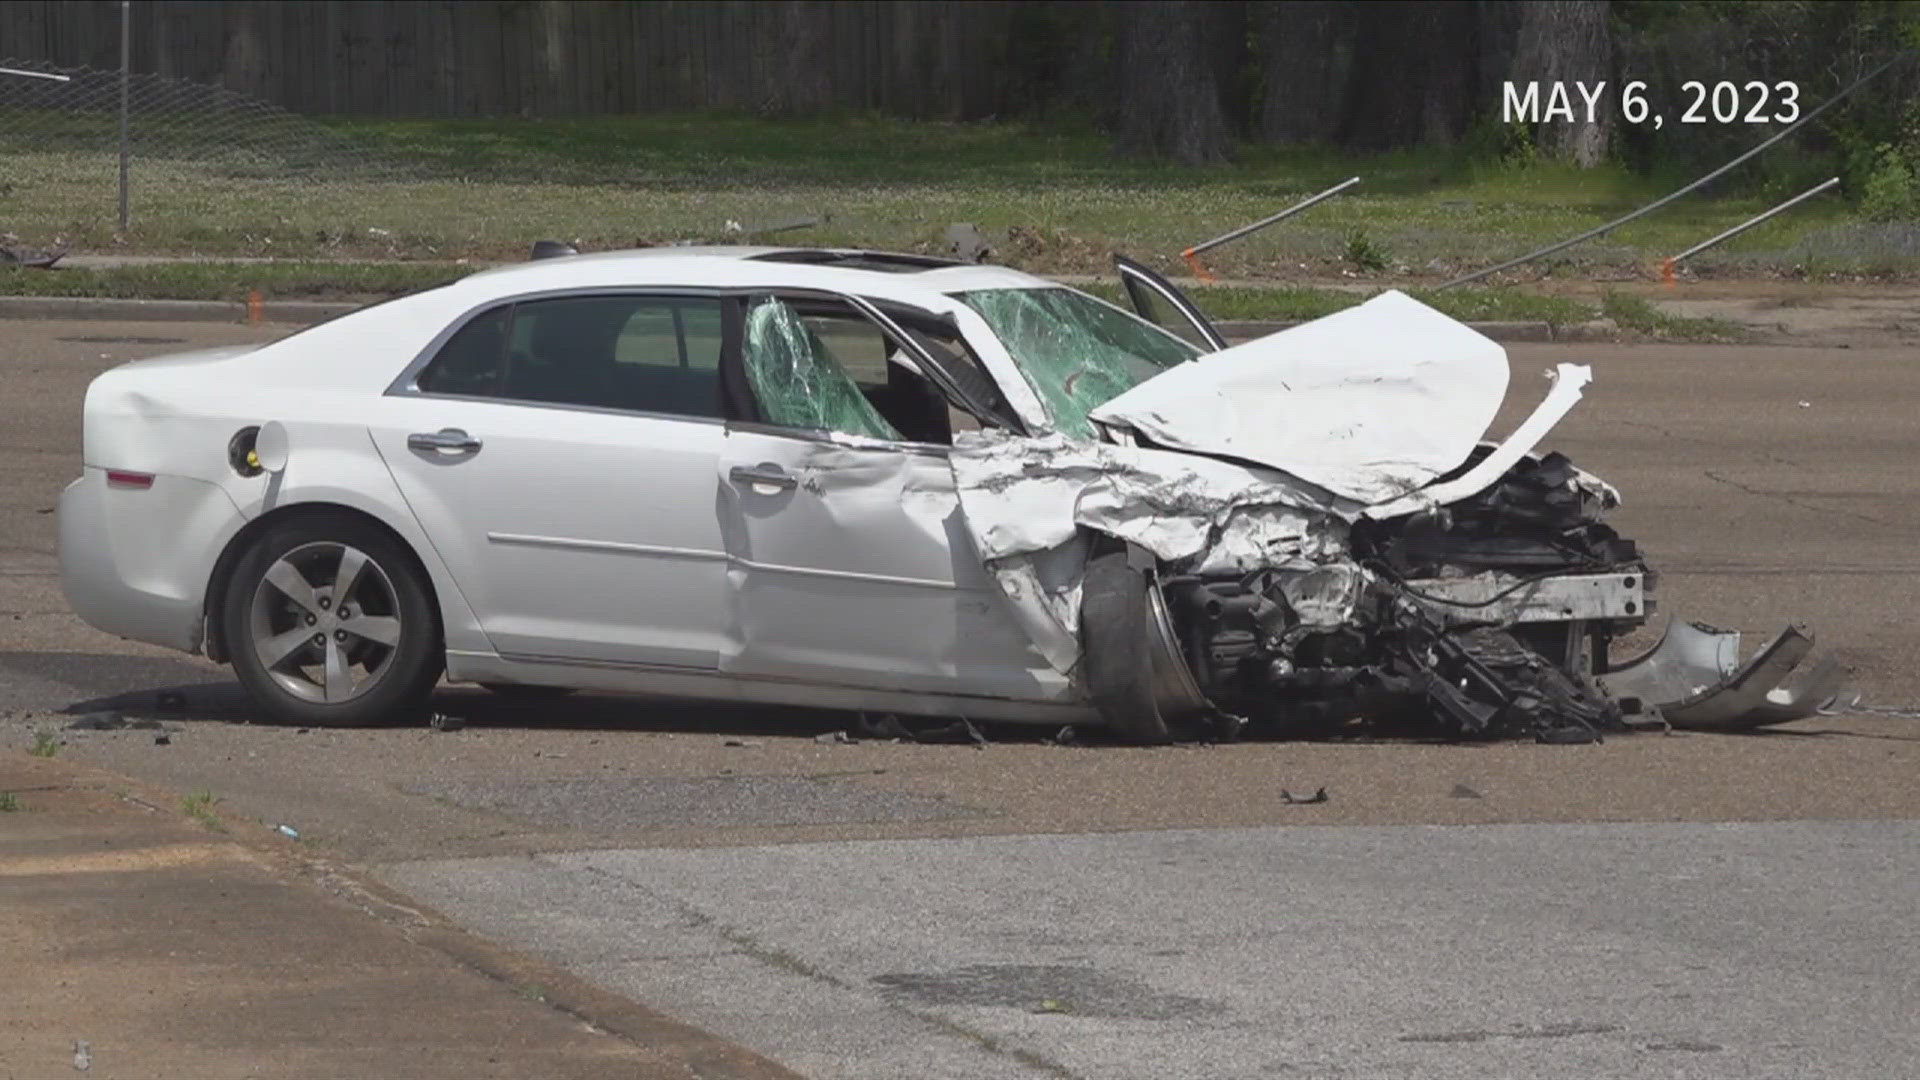 Two former Memphis Police Department officers have been indicted on criminal charges following a May 6, 2023, crash that left one woman dead.